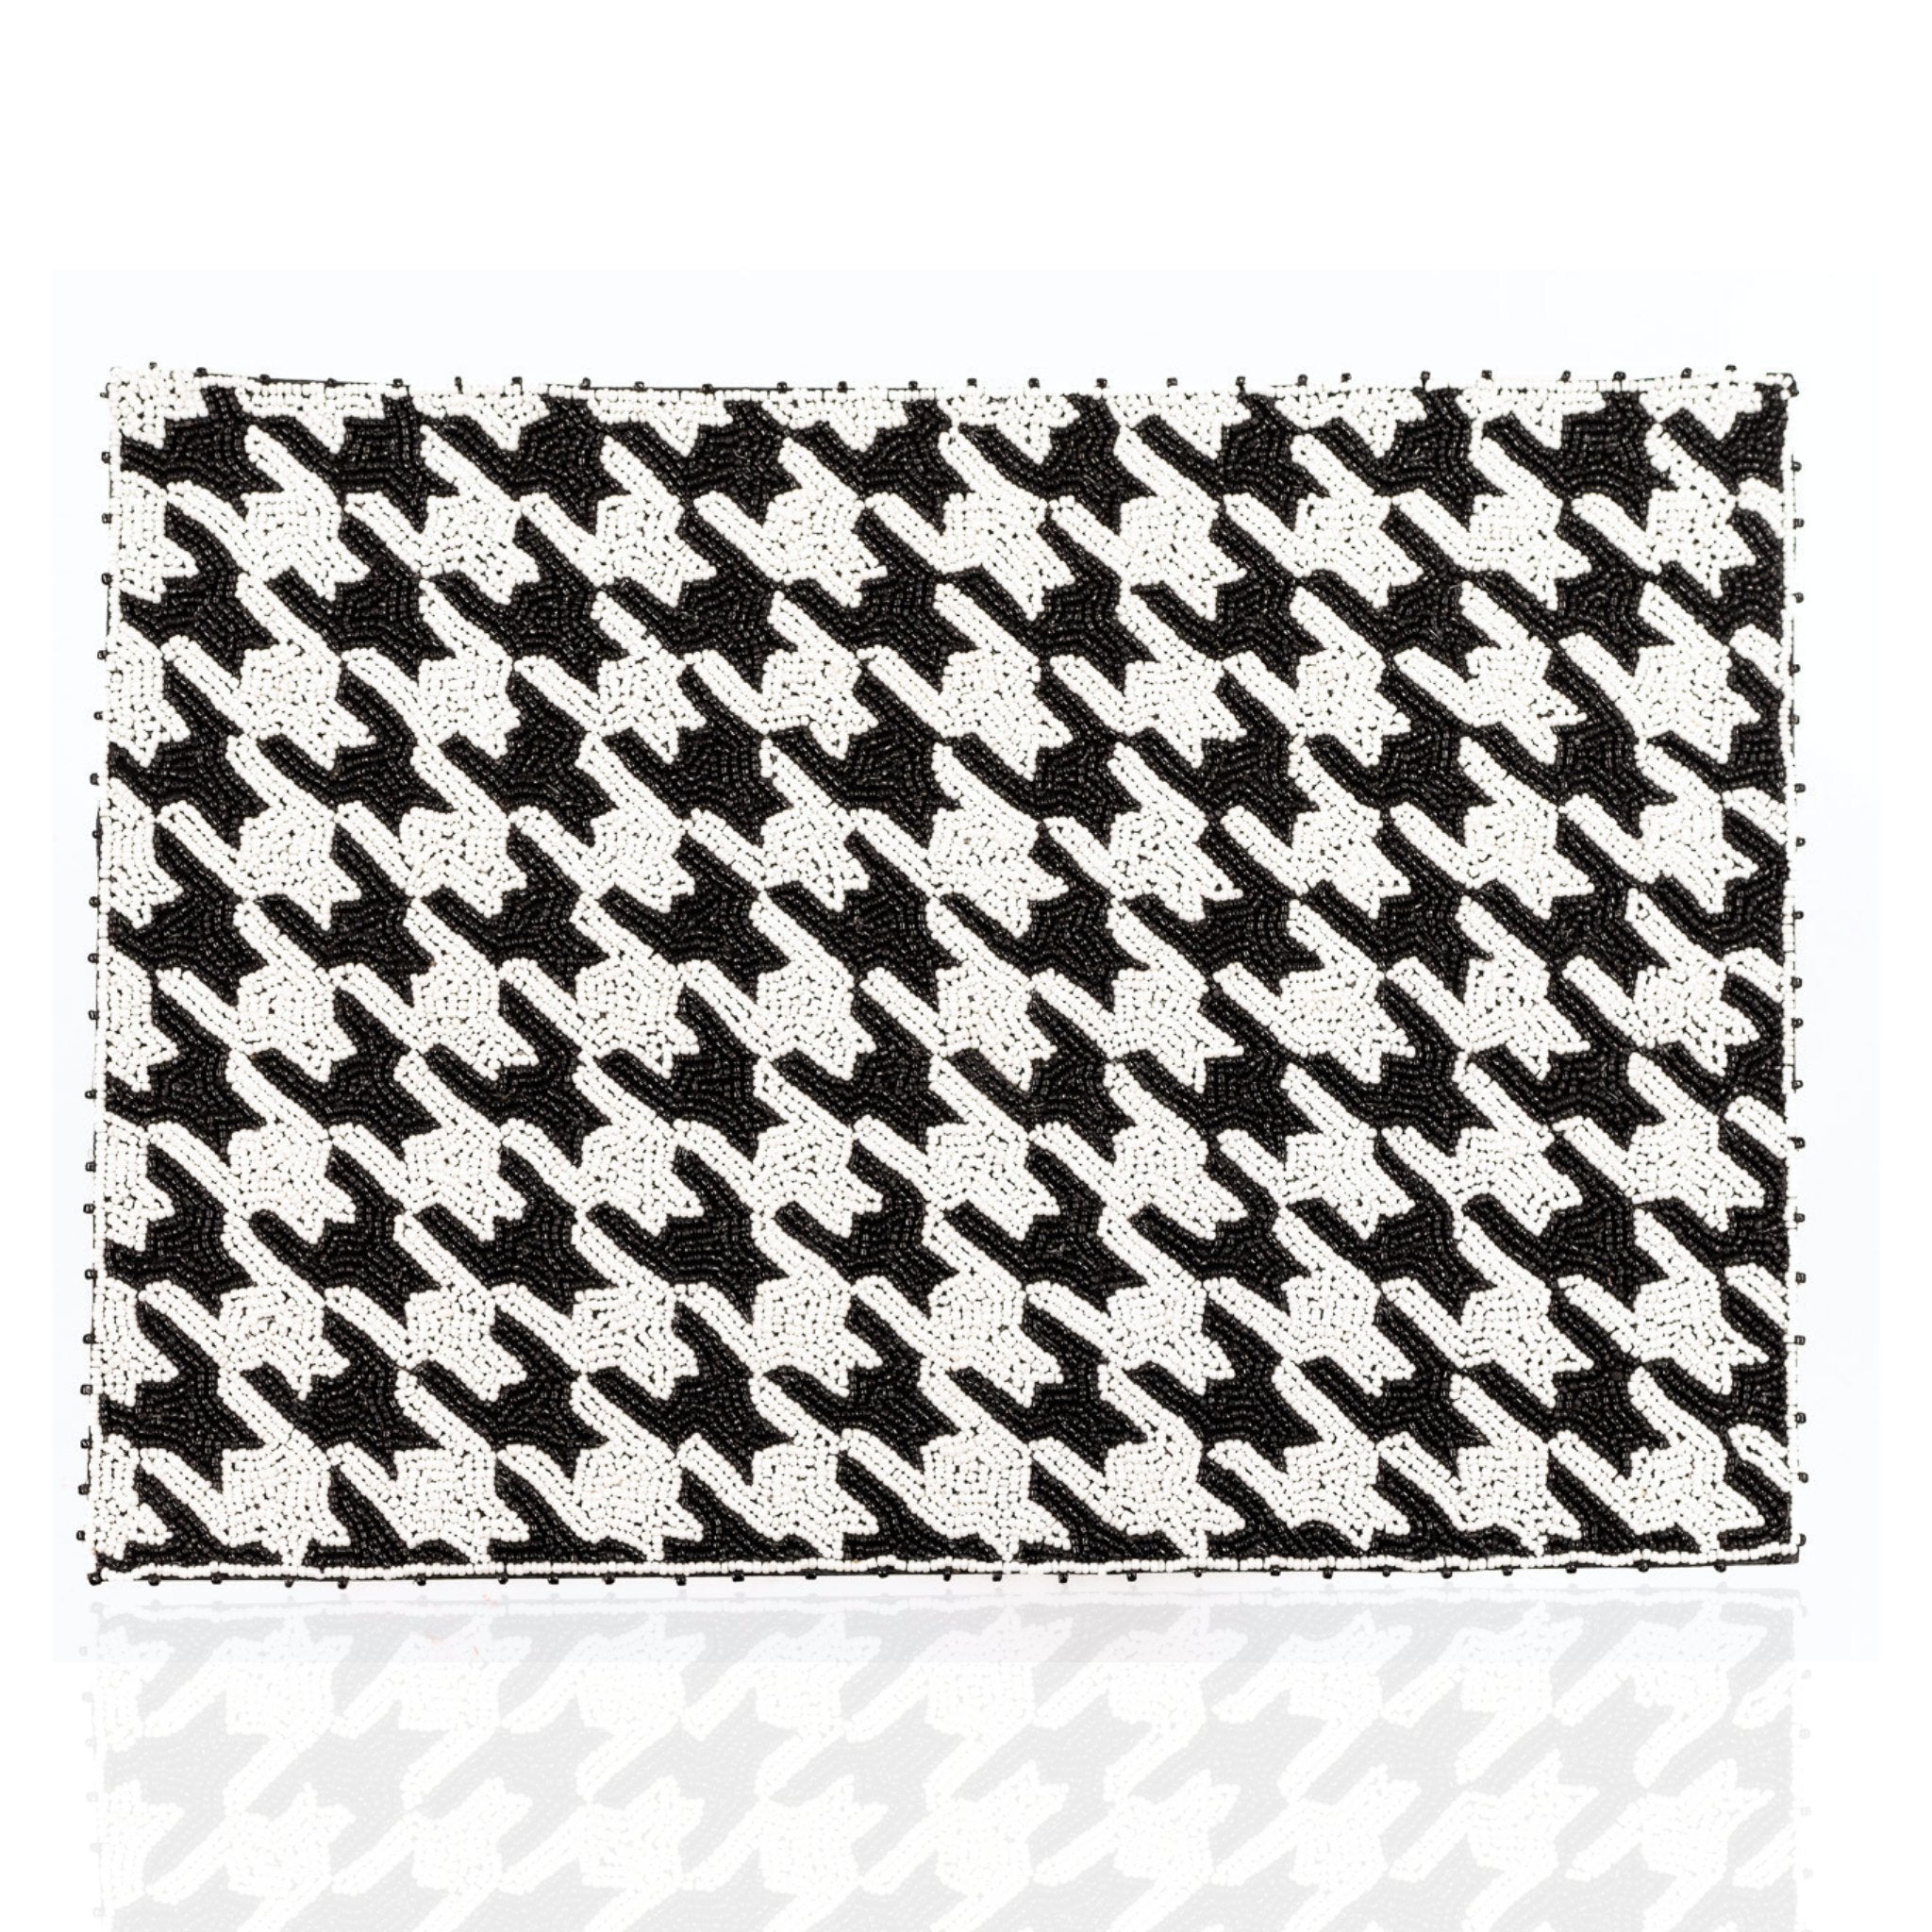 Mzuri Beaded Placemat and Napkin Ring Set of 4 - Houndstooth - Sassy Jones